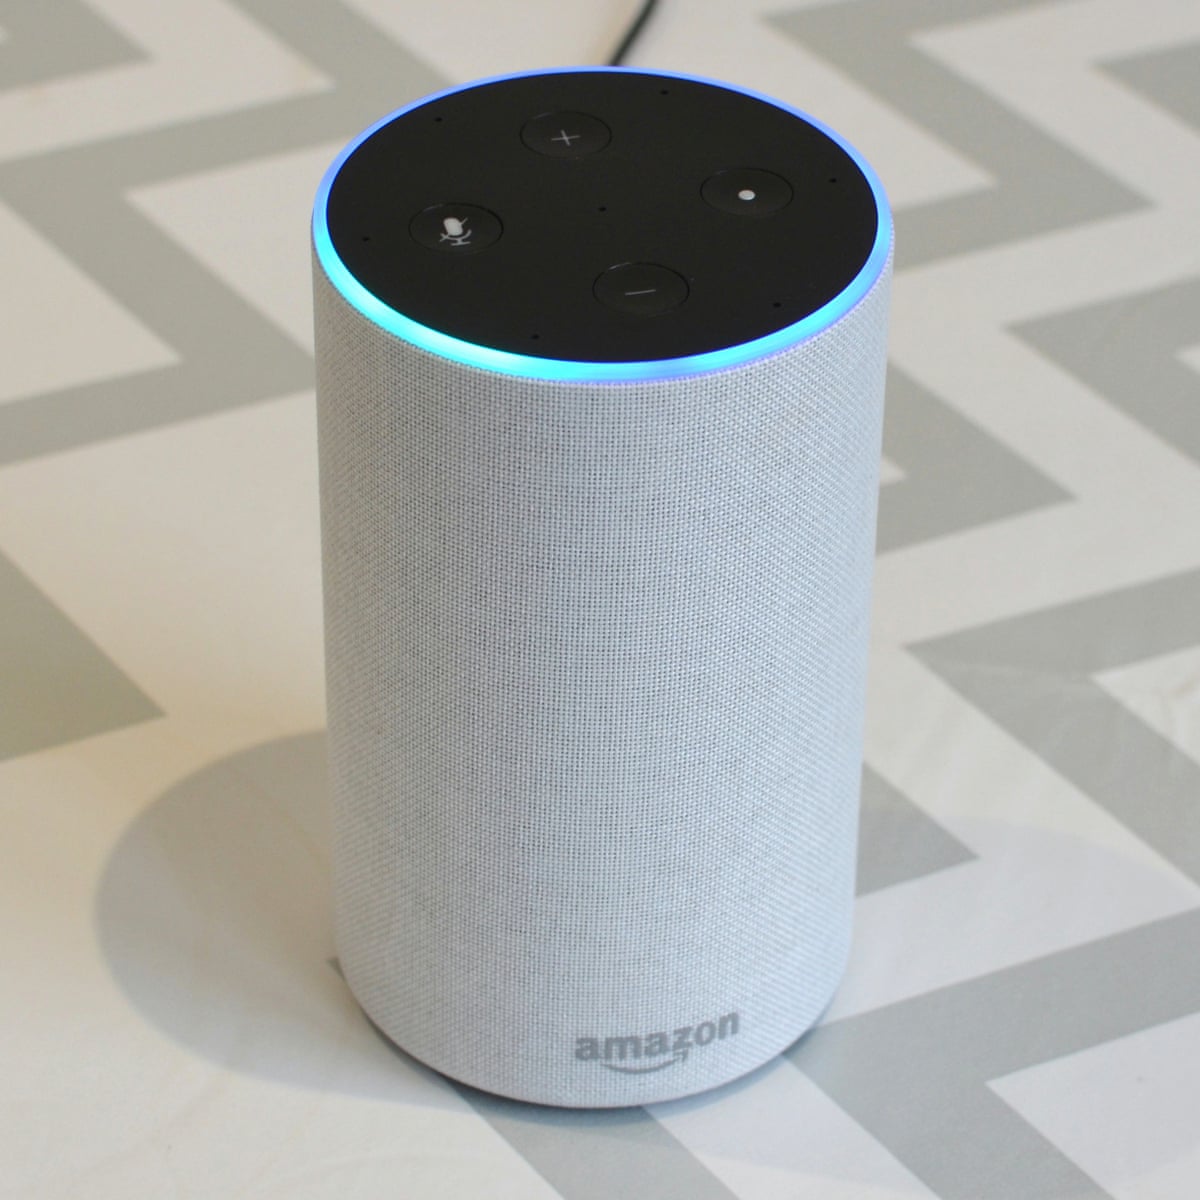 Amazon Echo, or Sonos One: which smart should I buy? | Smart speakers | The Guardian